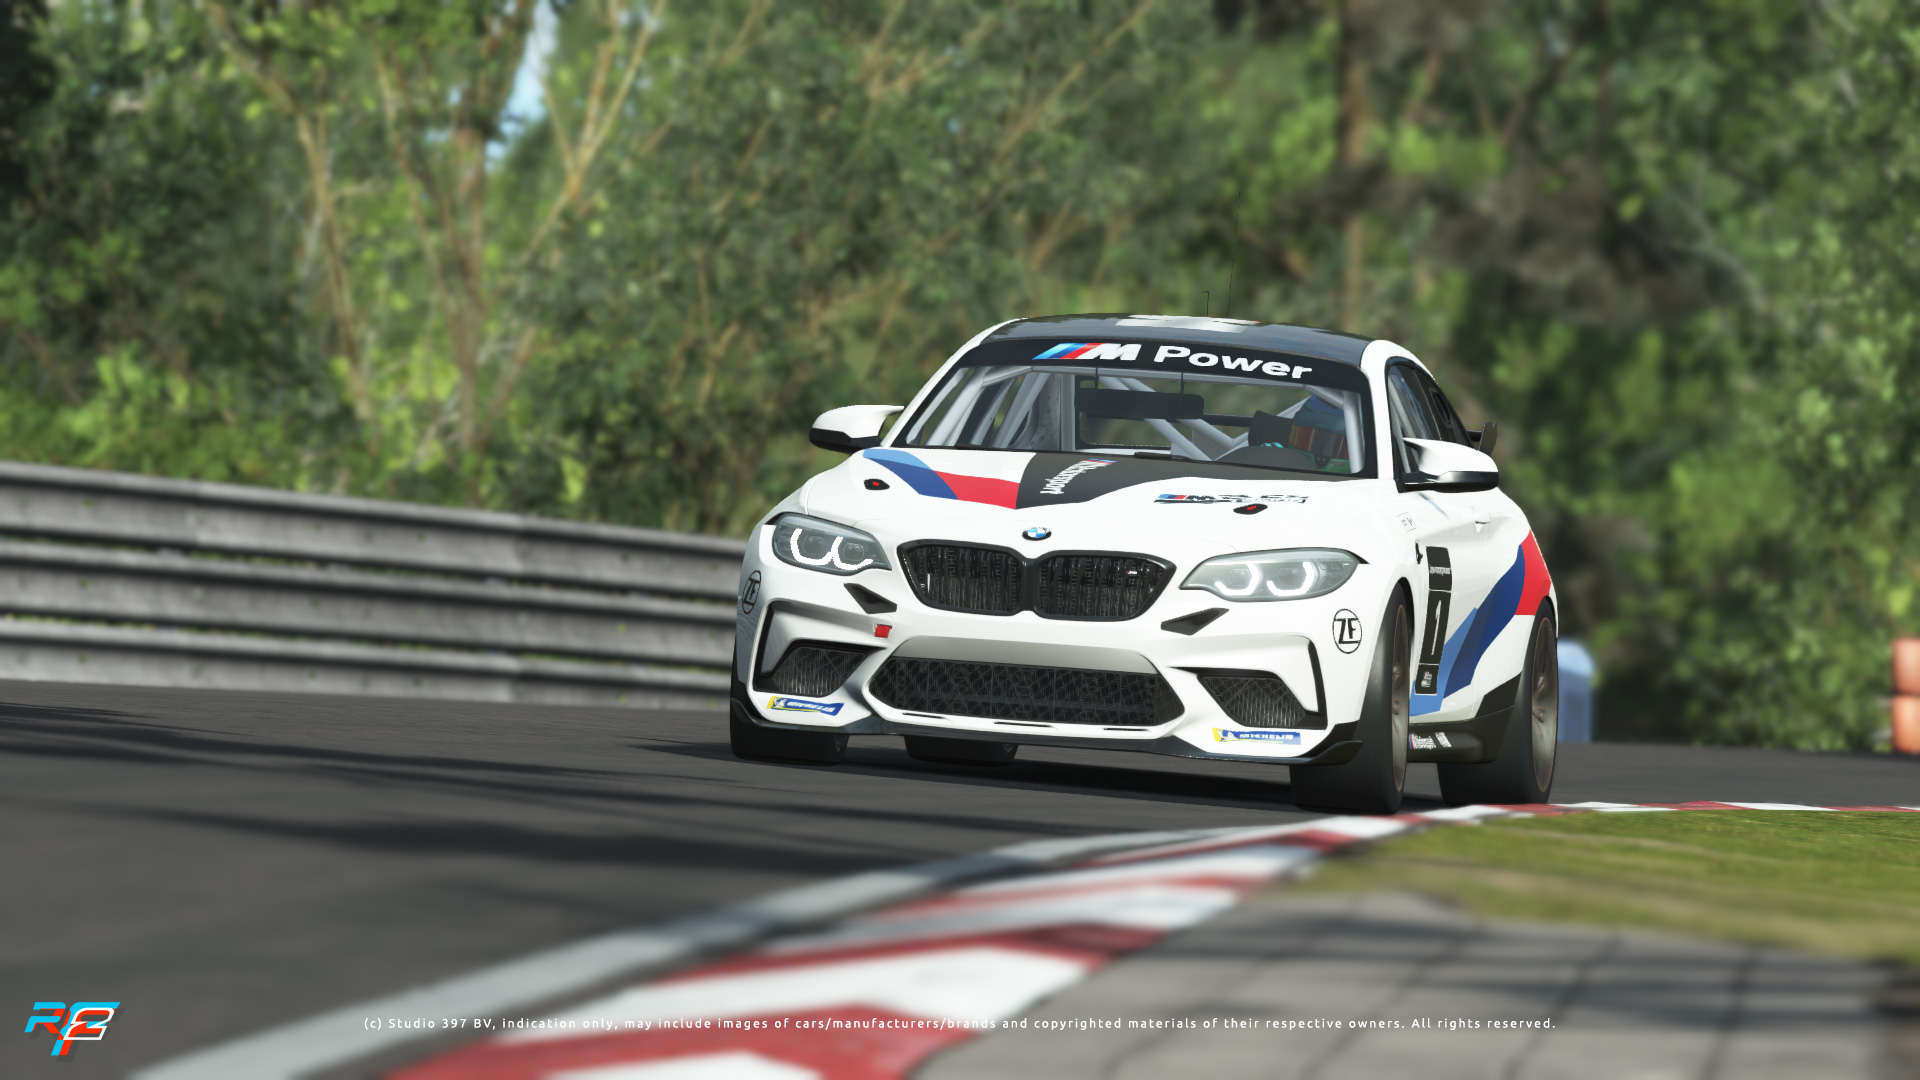 More information about "rFactor 2: Roadmap Update October 2020"